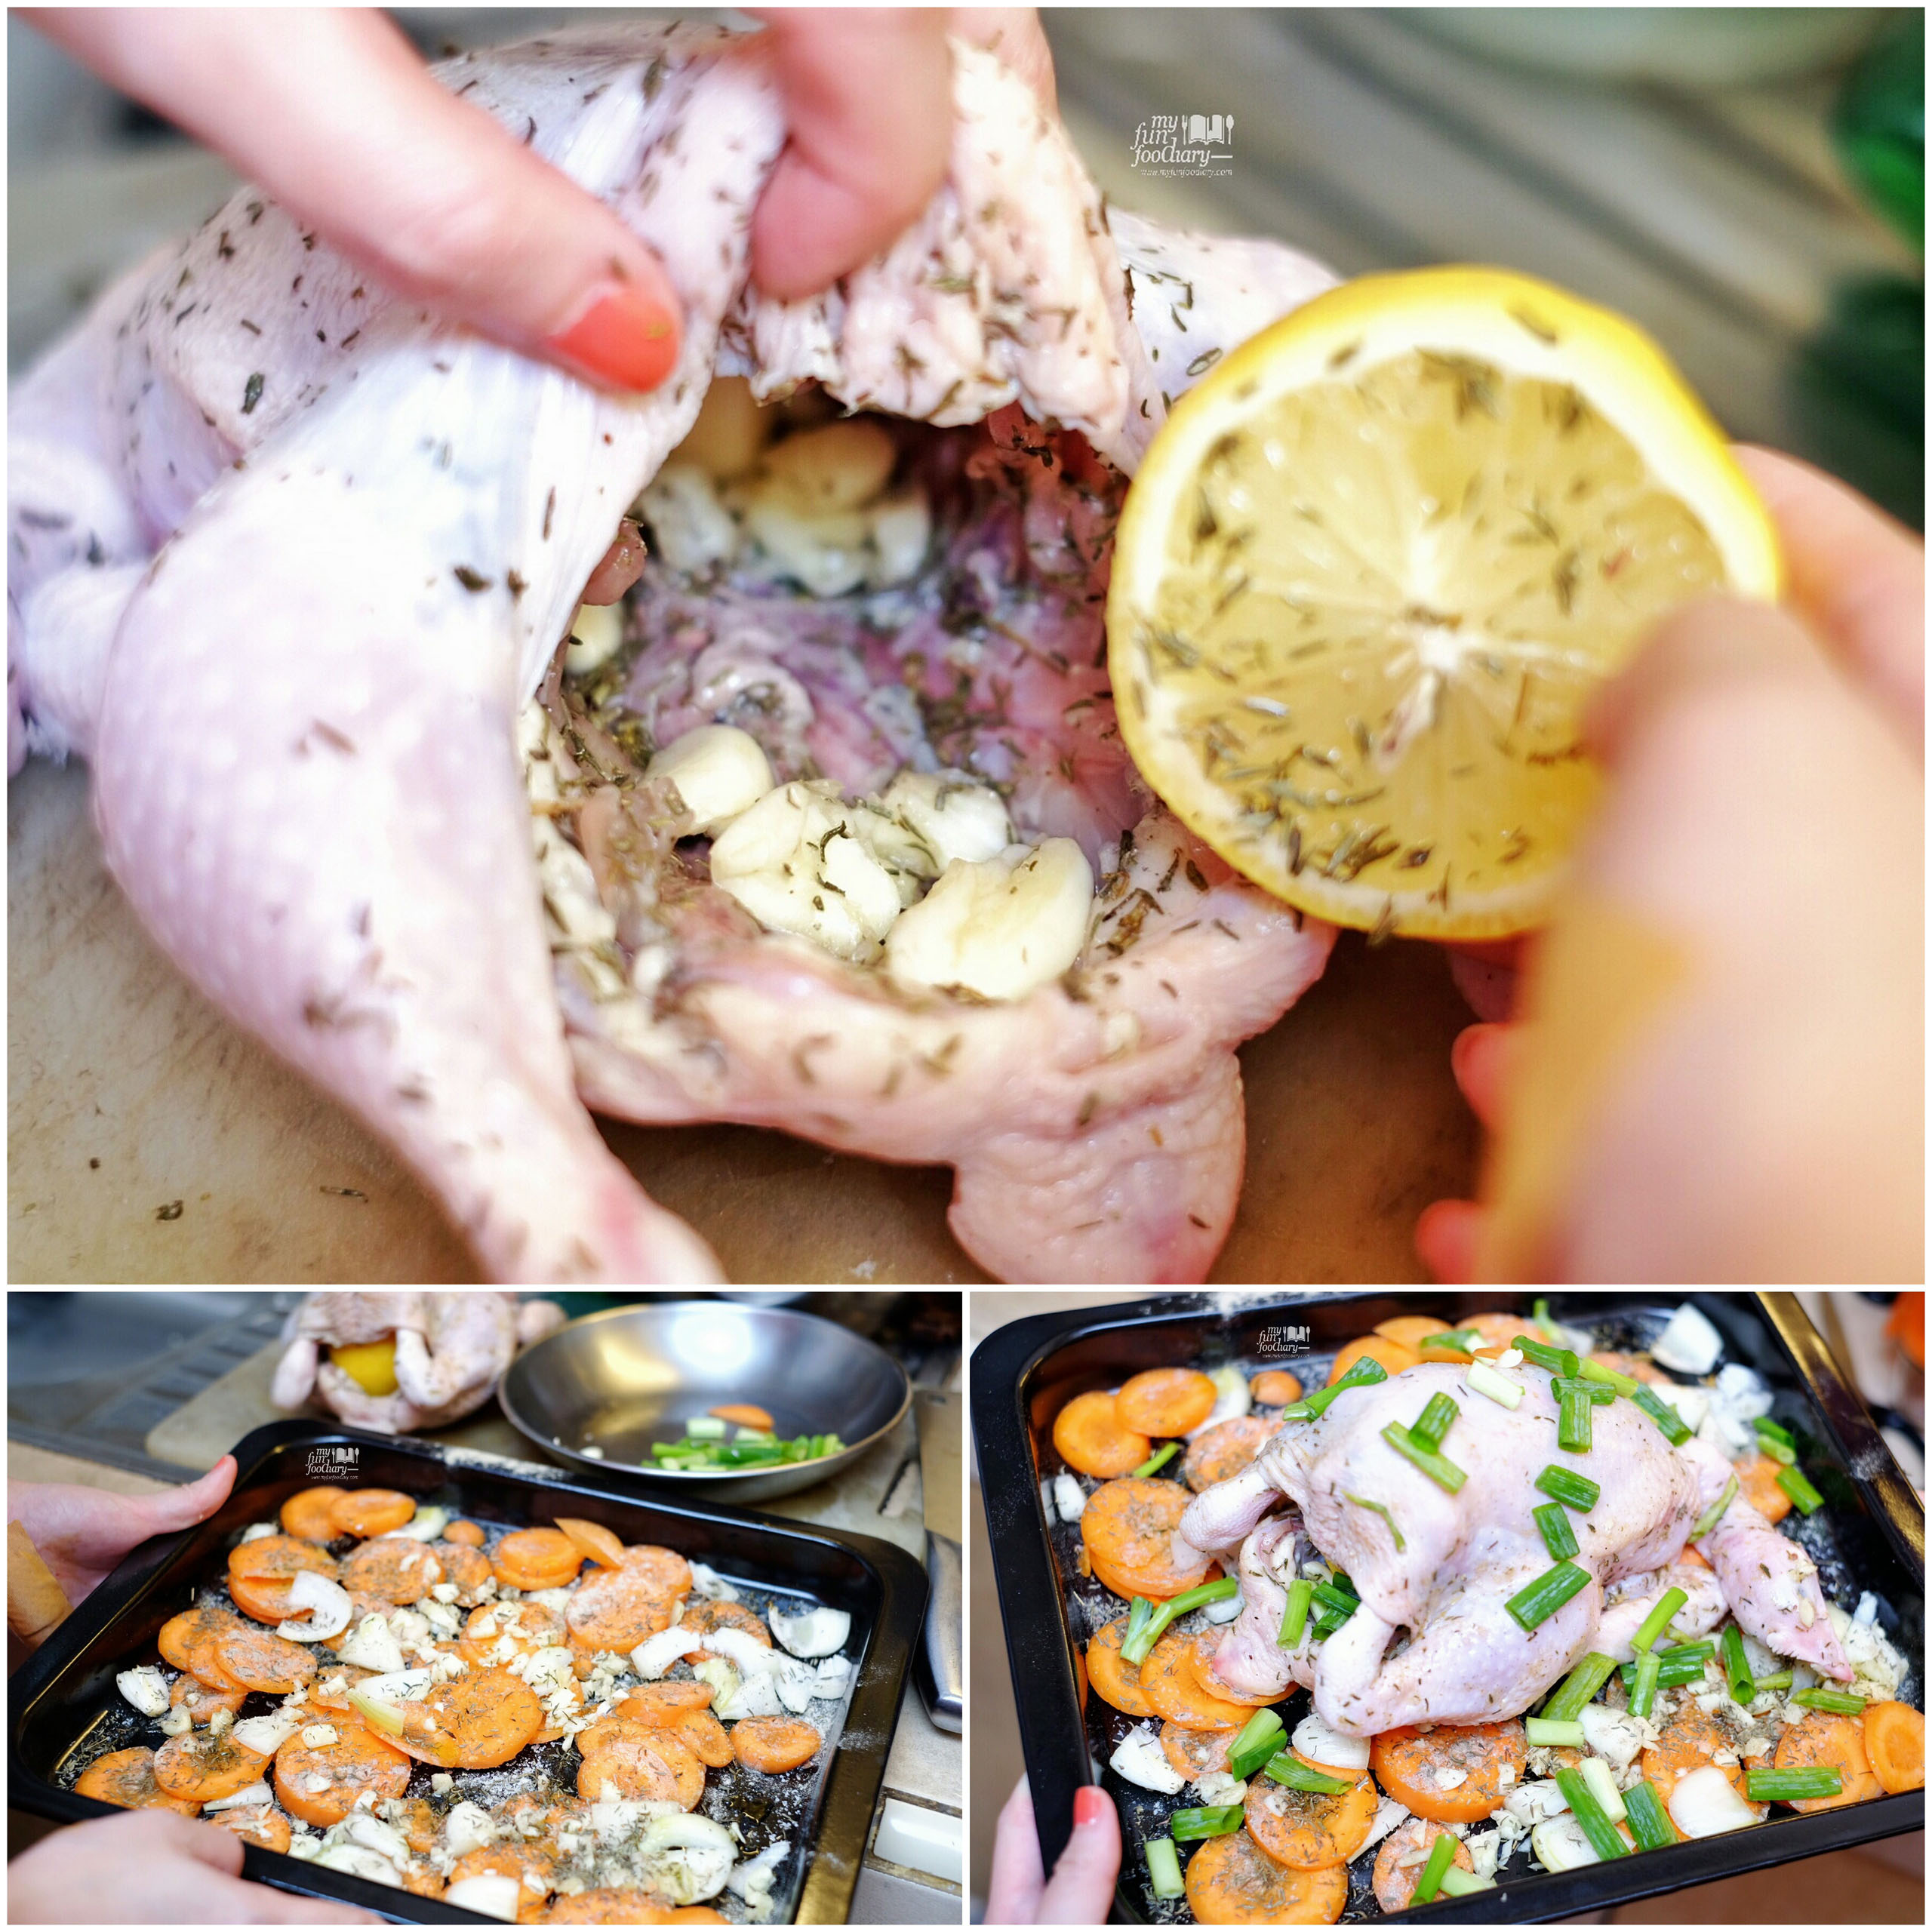 Step by Step Preparing the Roasted Chicken by Myfunfoodiary